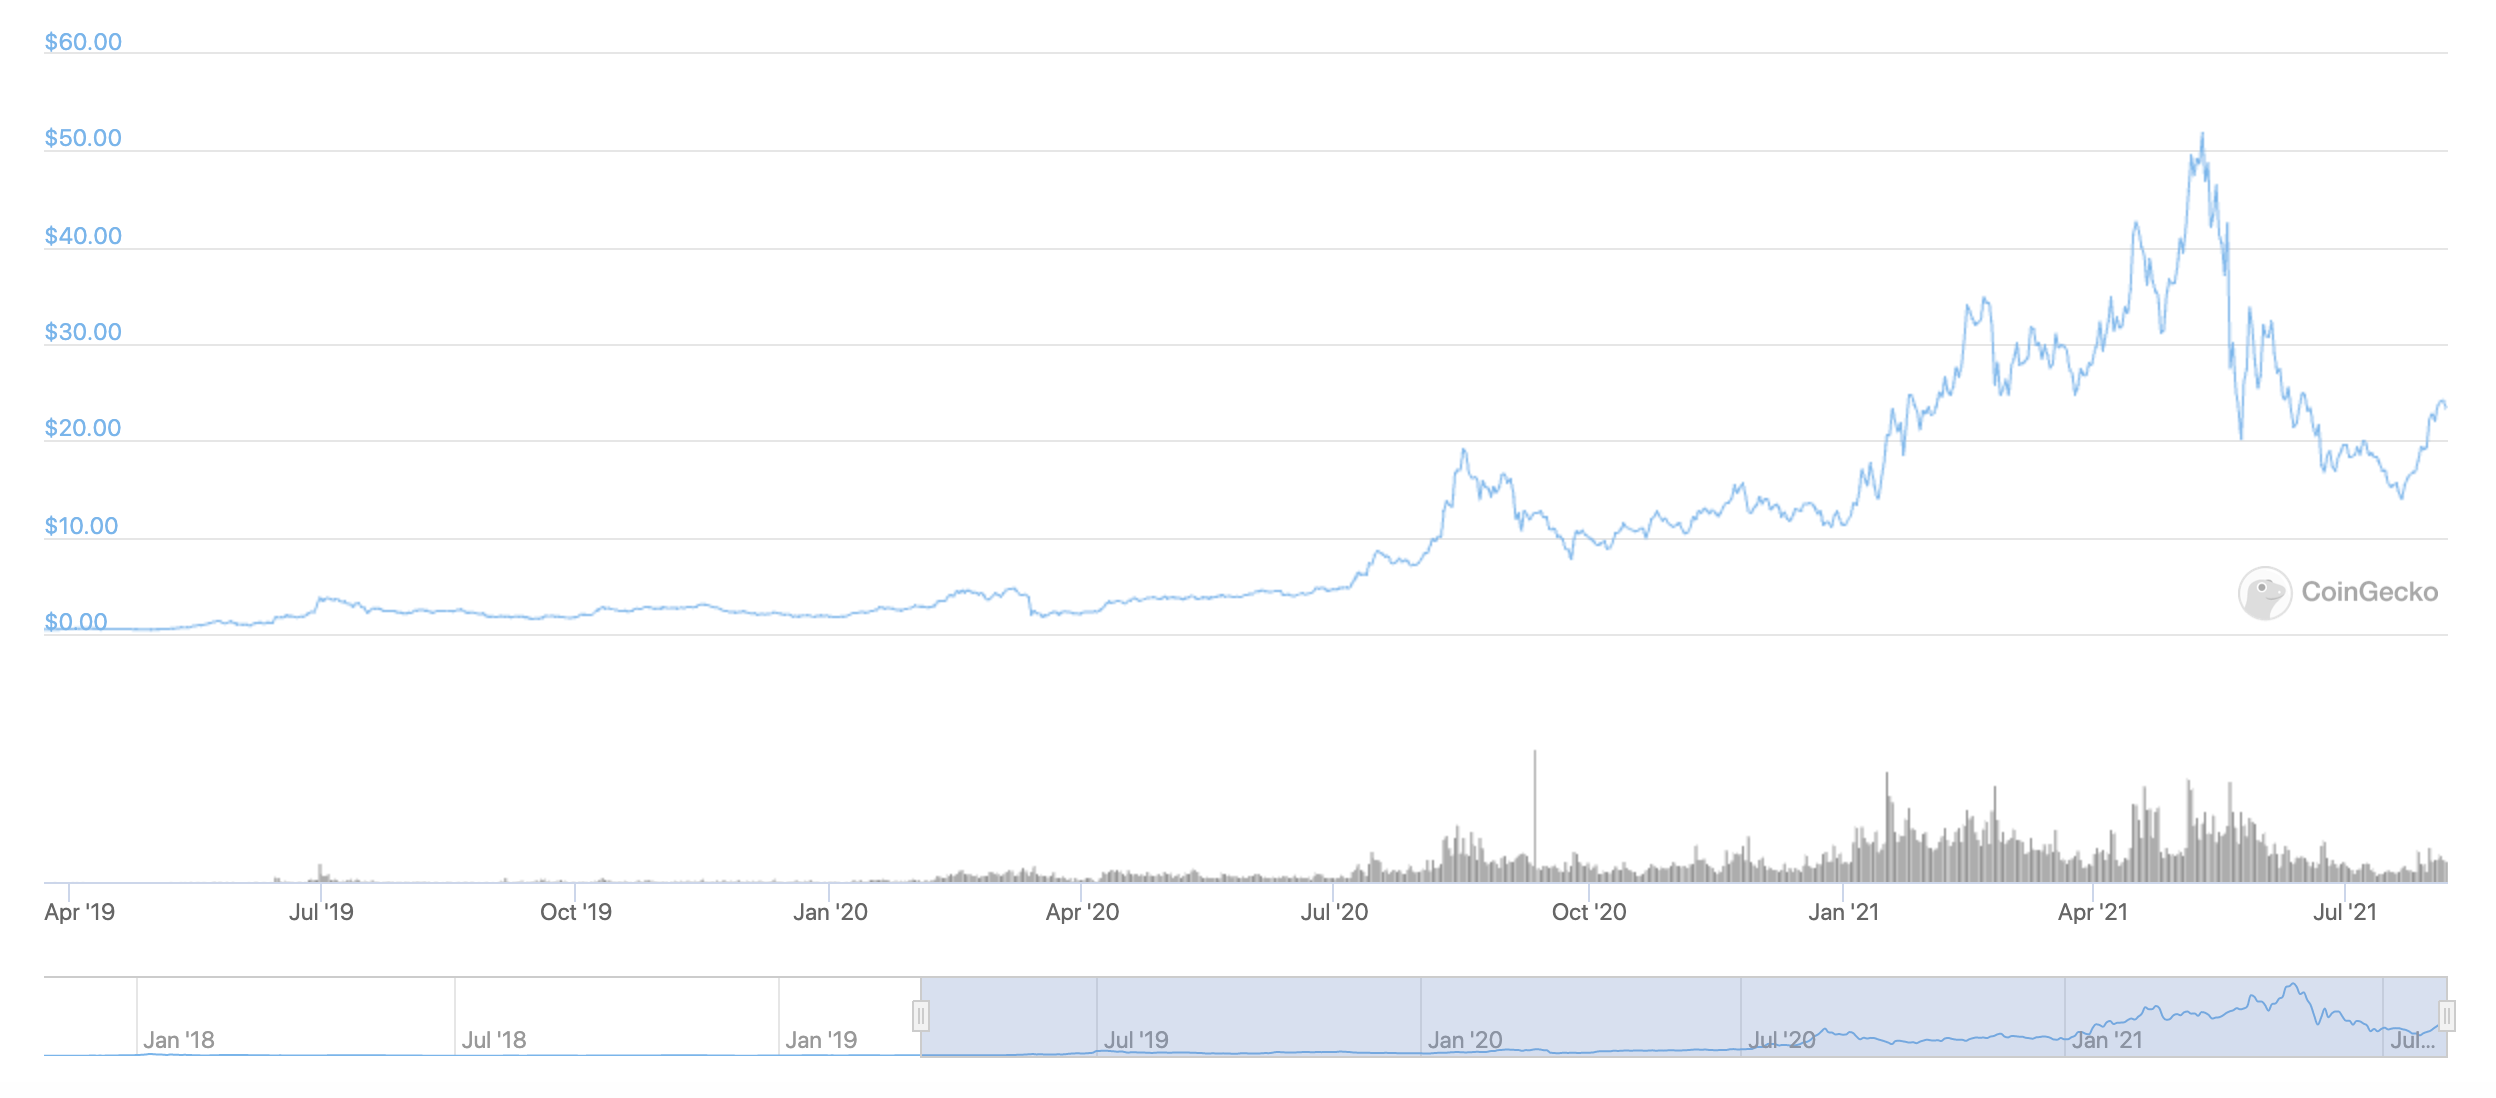 The current LINK token's price chart taken from CoinGecko.